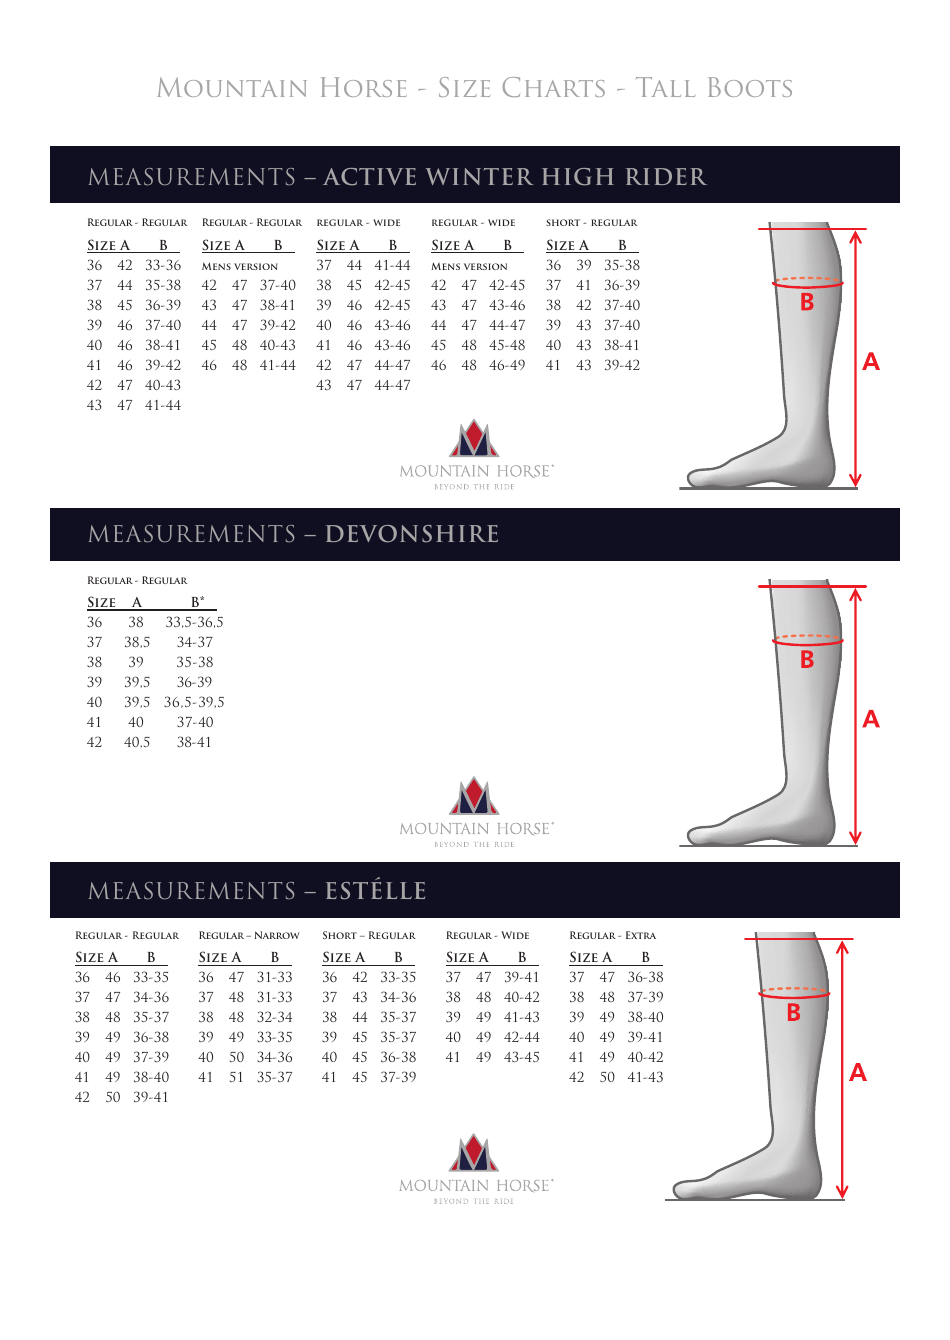 Tall Boots Size Charts - Mountain Horse, Page 1